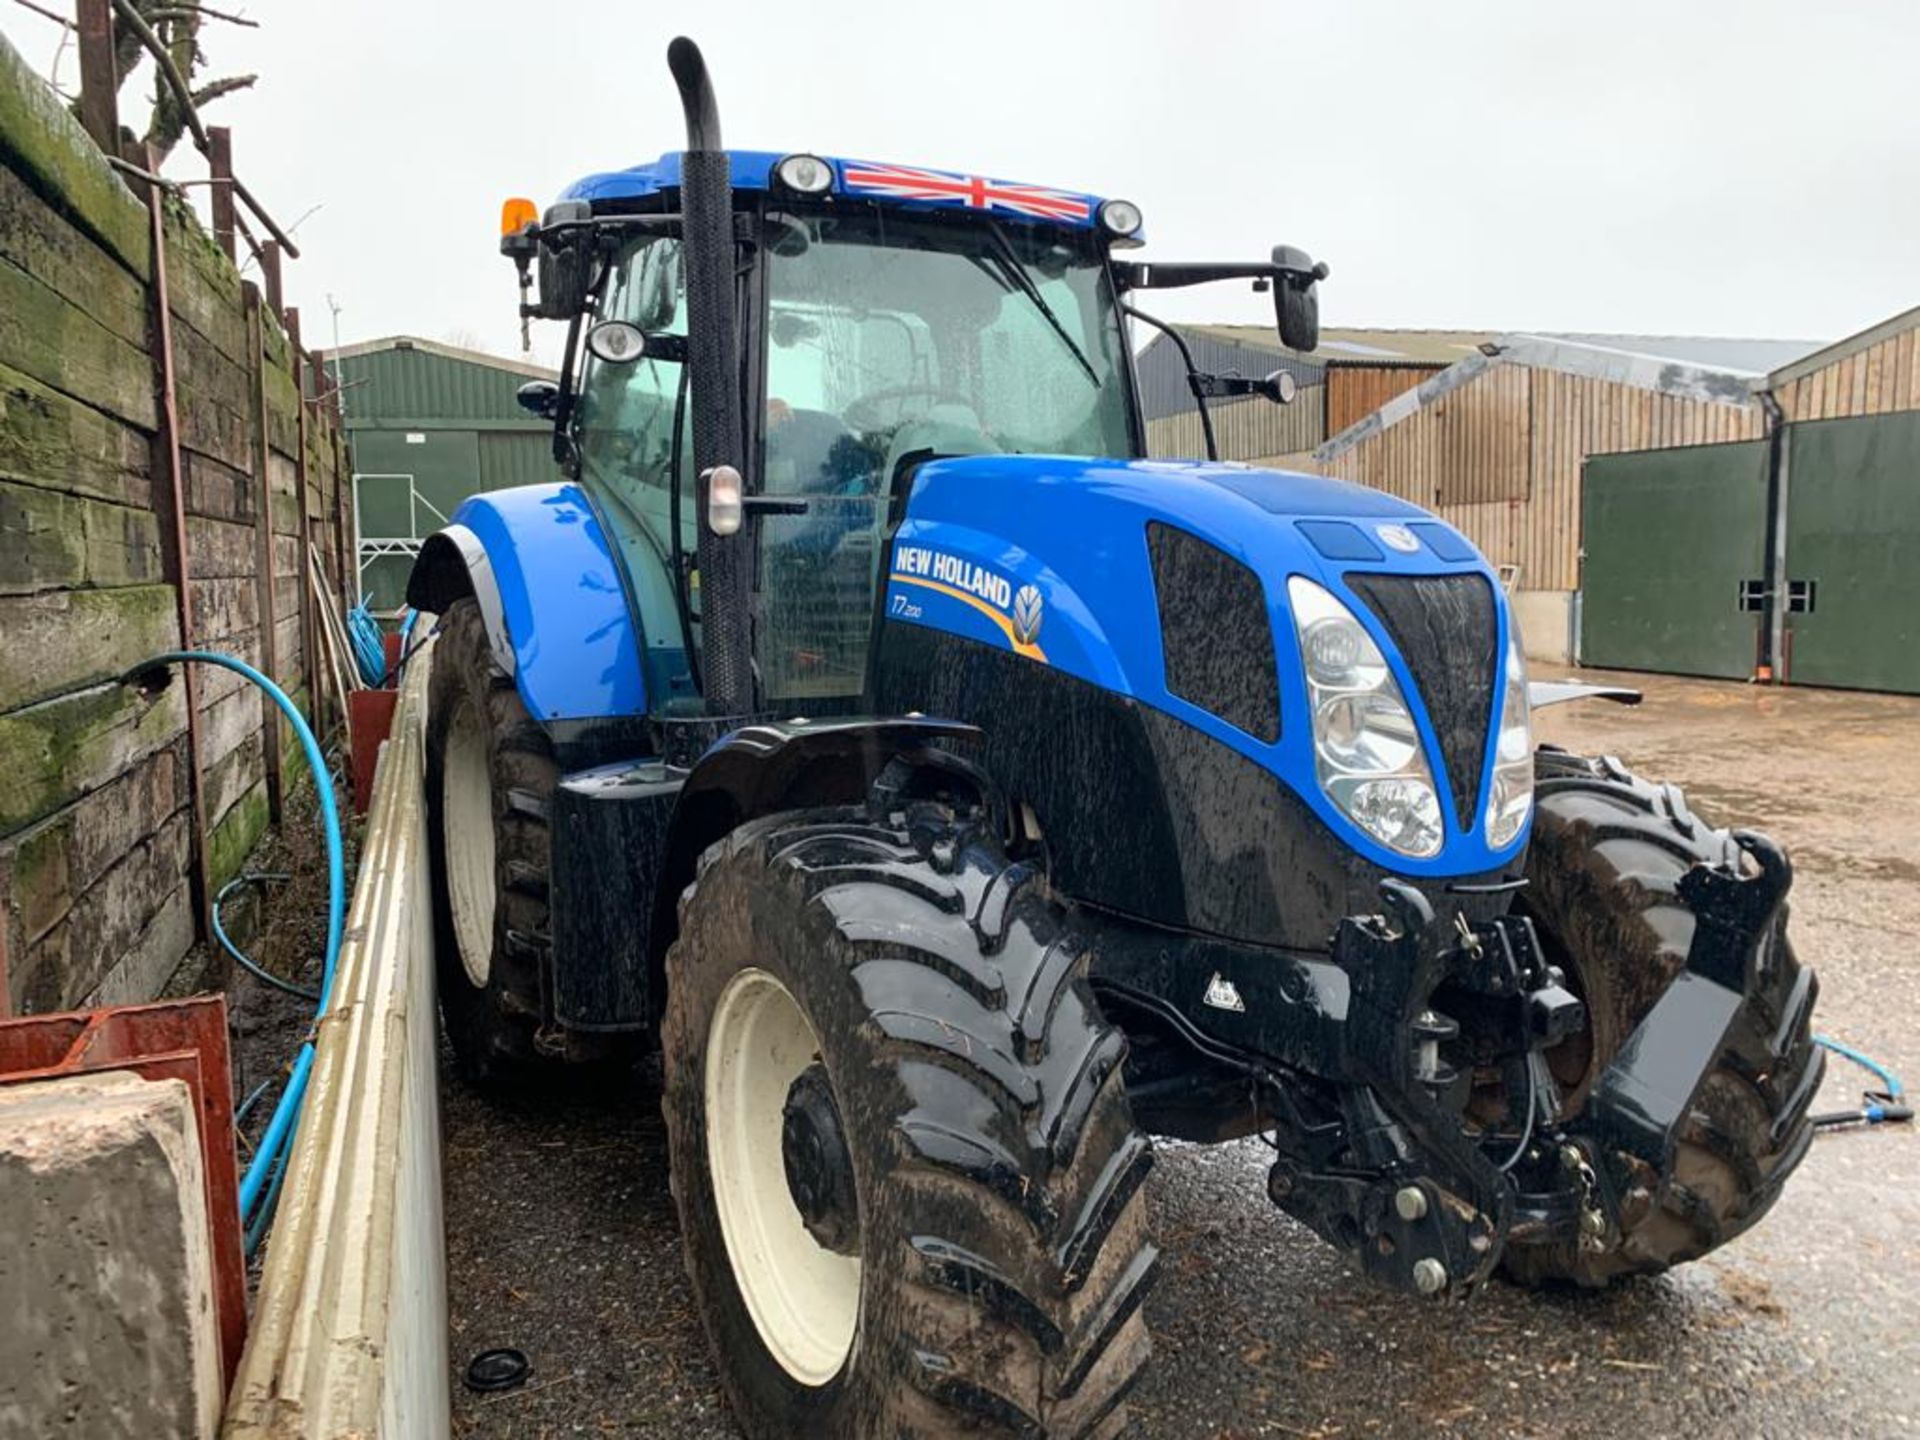 2013/63 REG NEW HOLLAND T7.200 TRACTOR, SHOWING 1 FORMER KEEPER, RUNS AND WORKS AS IT SHOULD.